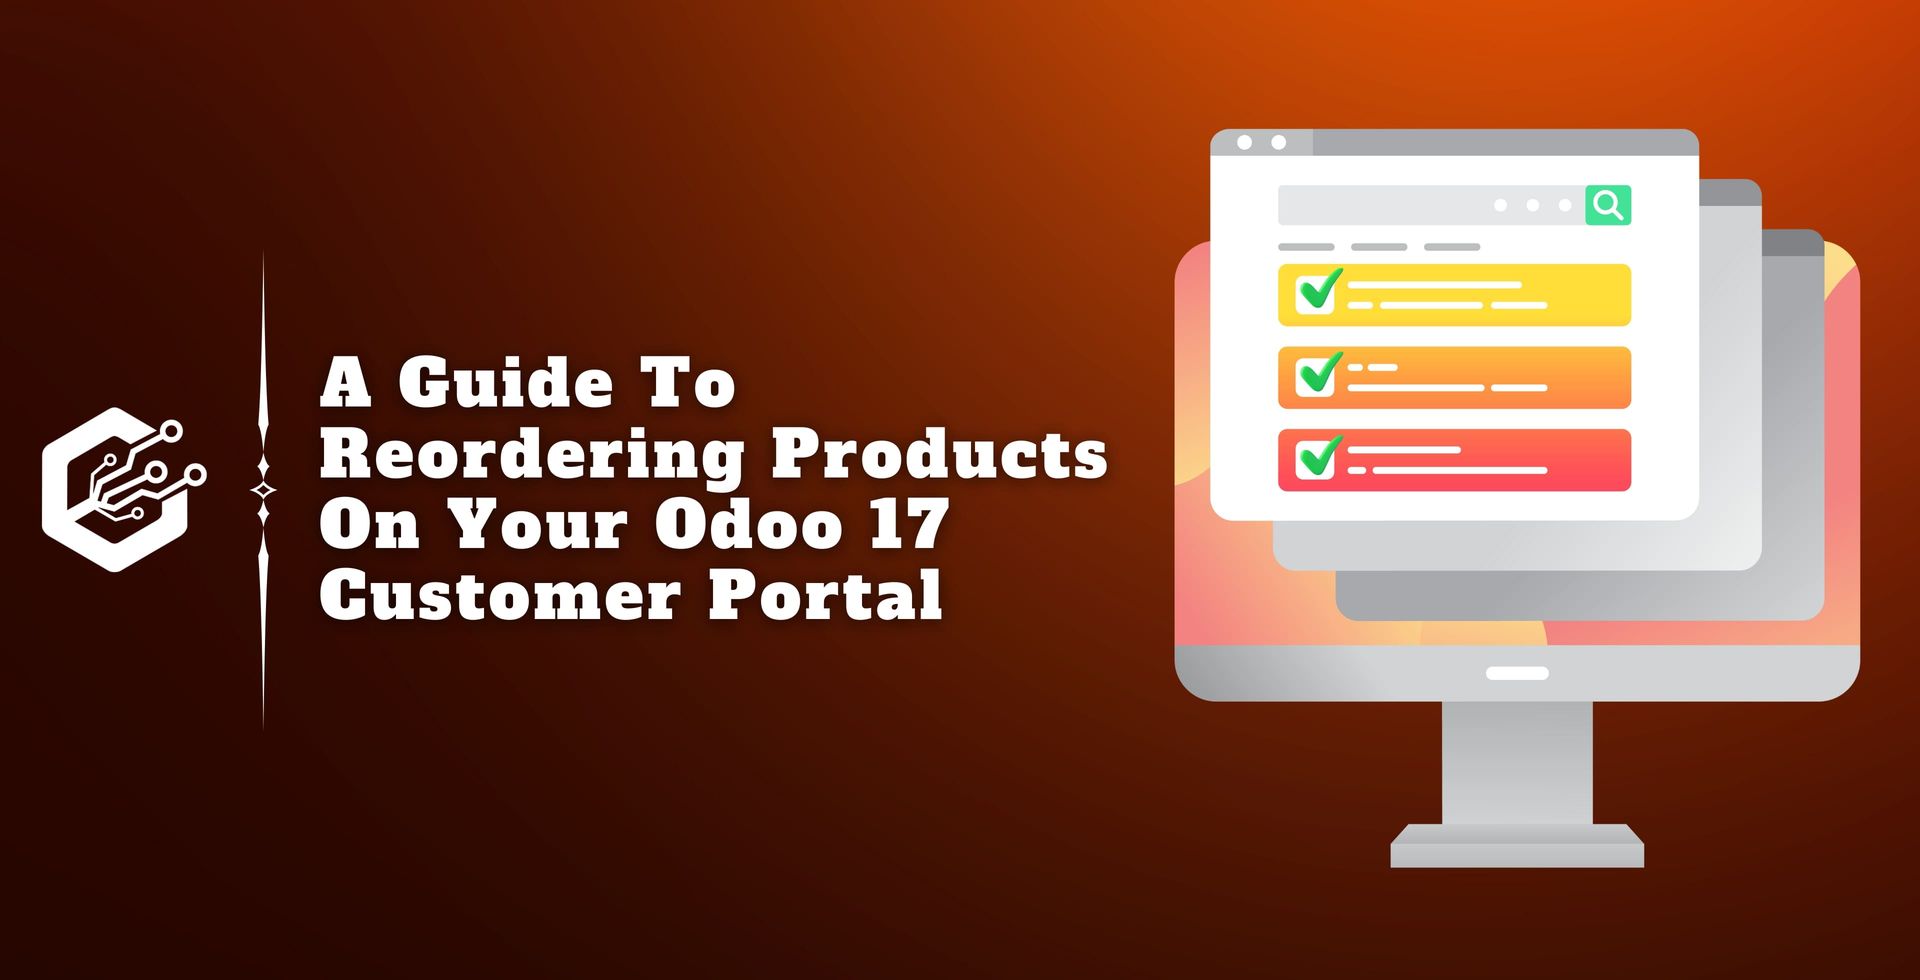 A Guide to Reordering Products On Your Odoo 17 Customer Portal